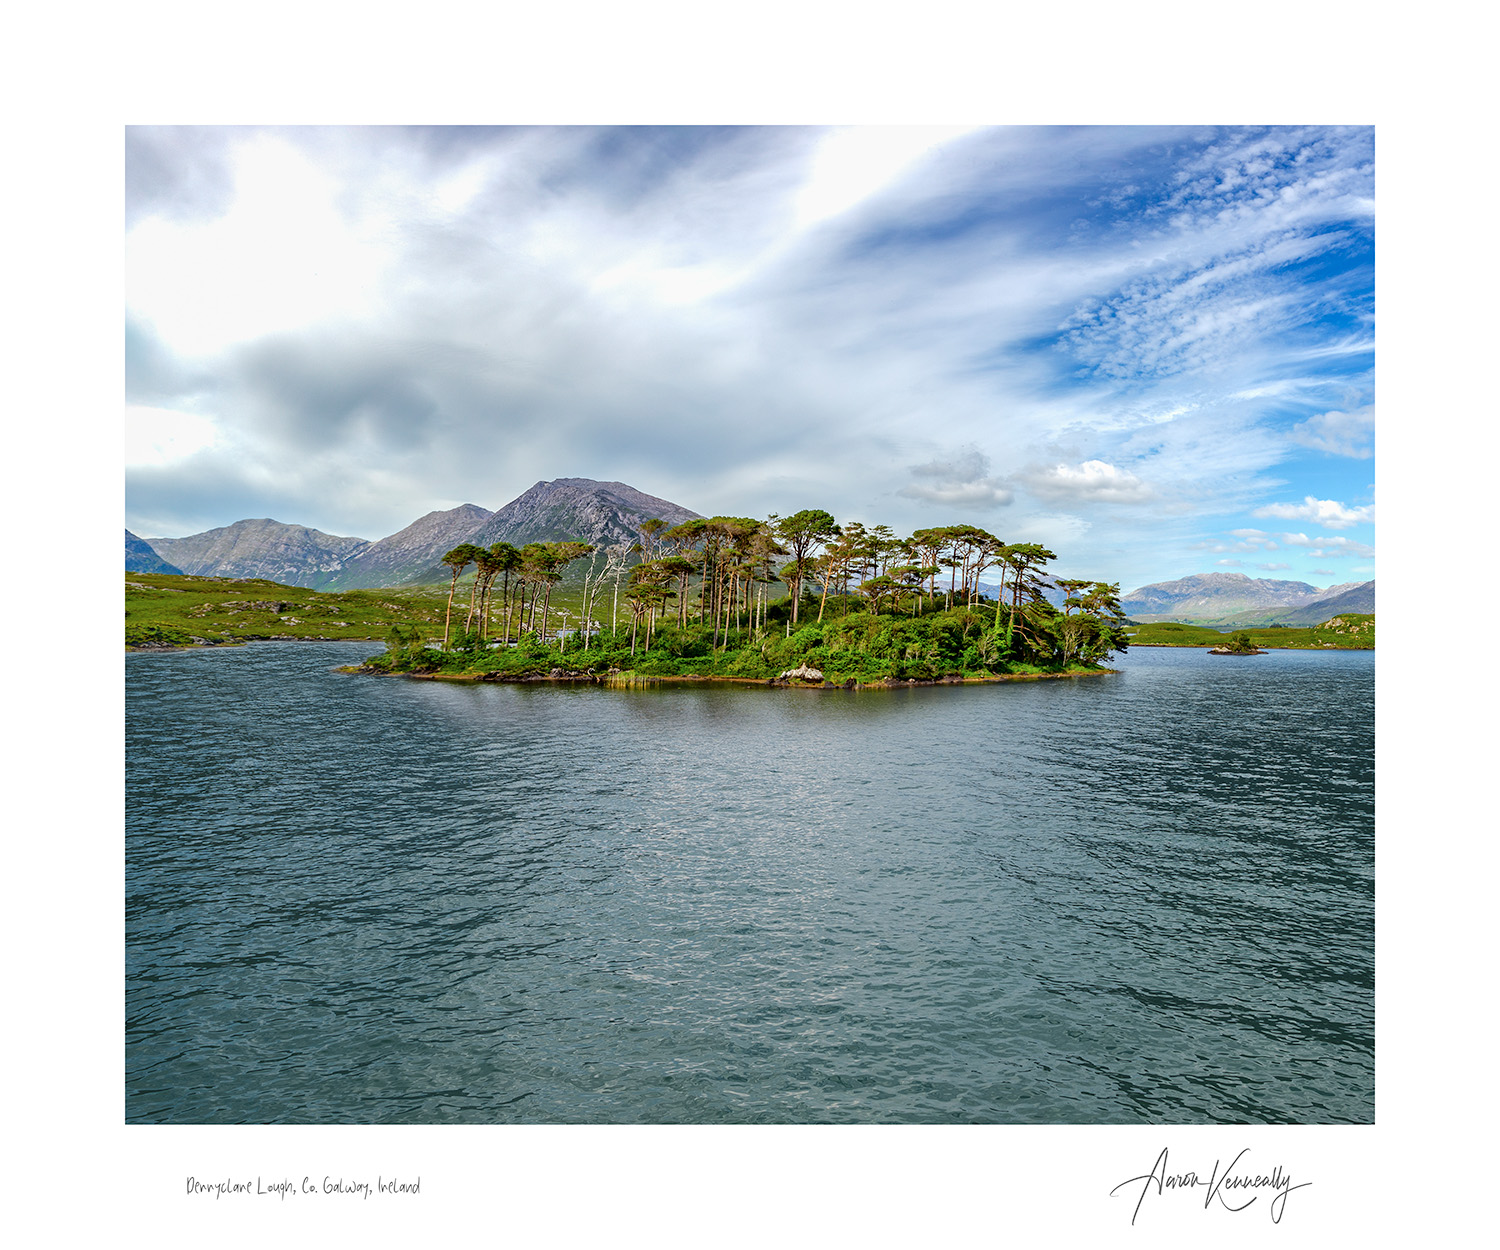 Derryclare Lough, Co. Galway, Ireland